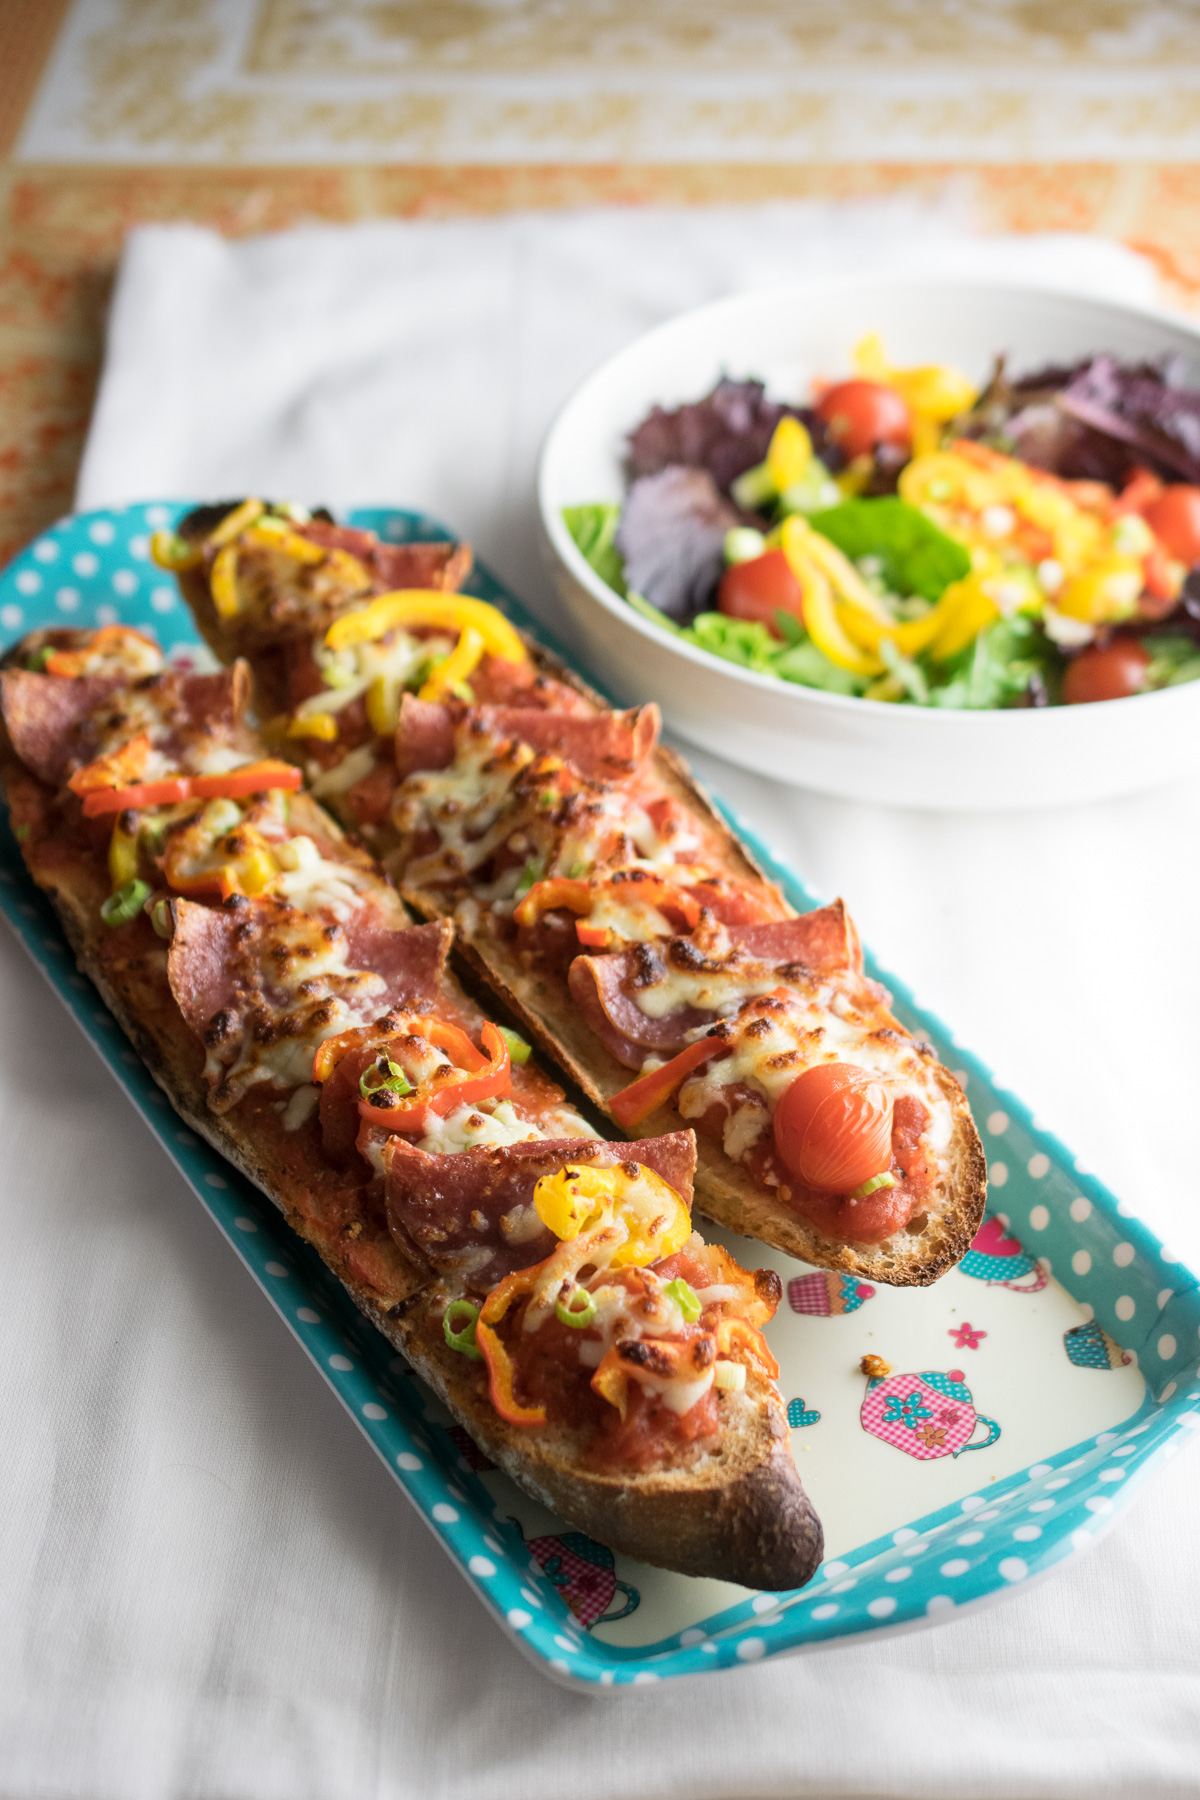 How to make French Bread Pizzas - a 15 minute dinner!